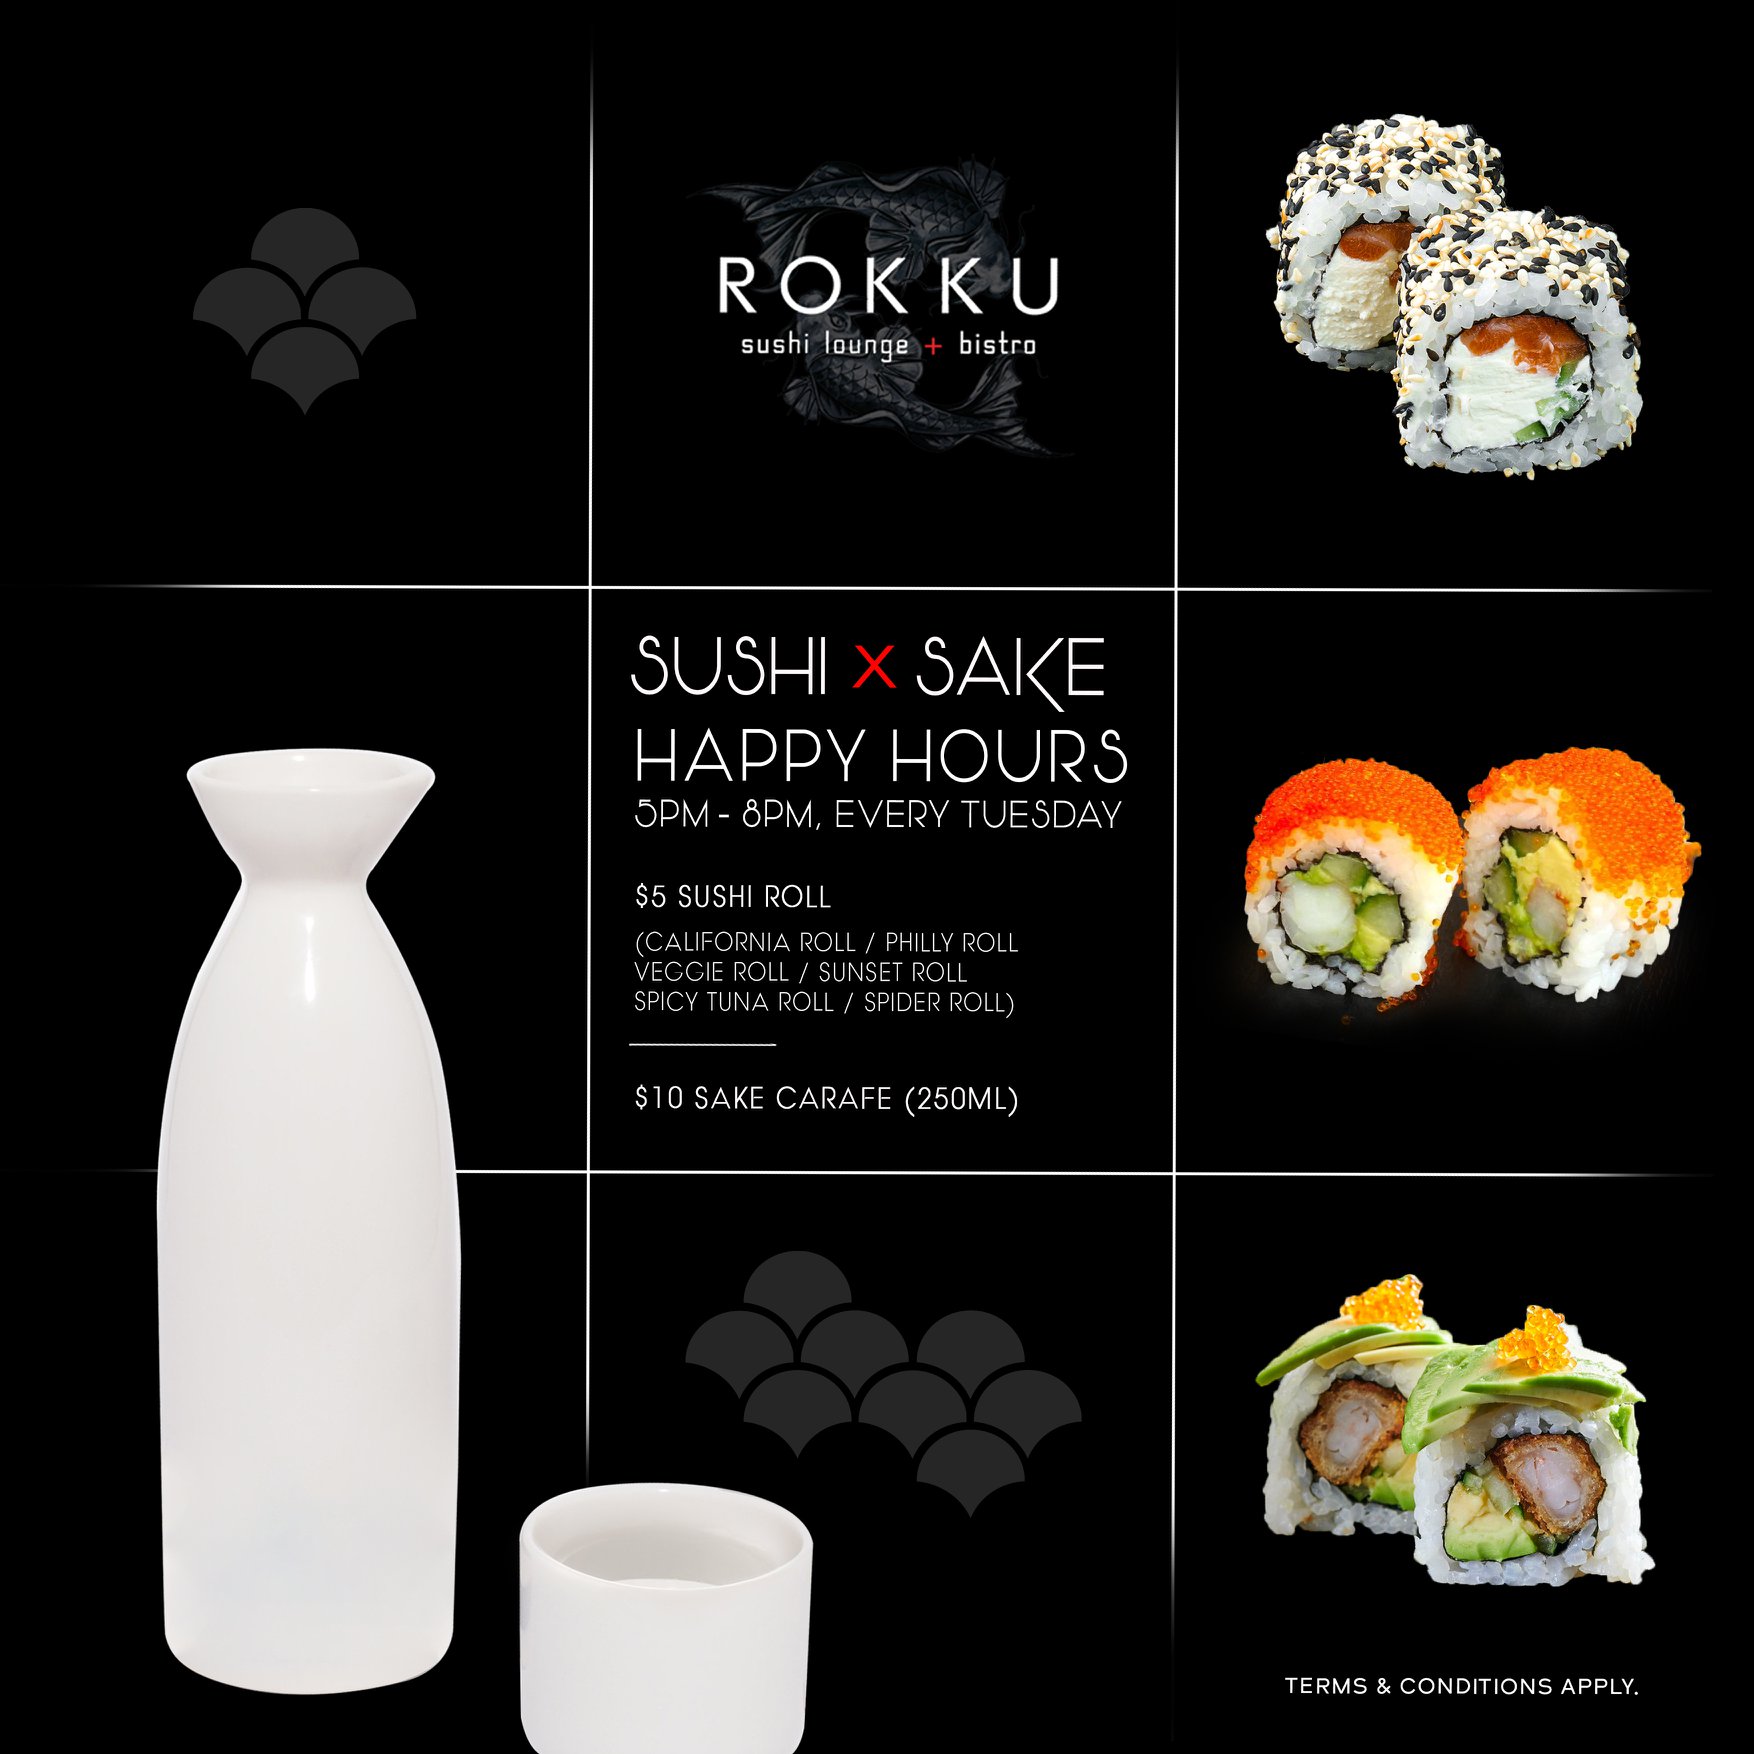 SUSHI x SAKE HAPPY HOURS TUESDAY AT ROKKU ON MARCH 2ND